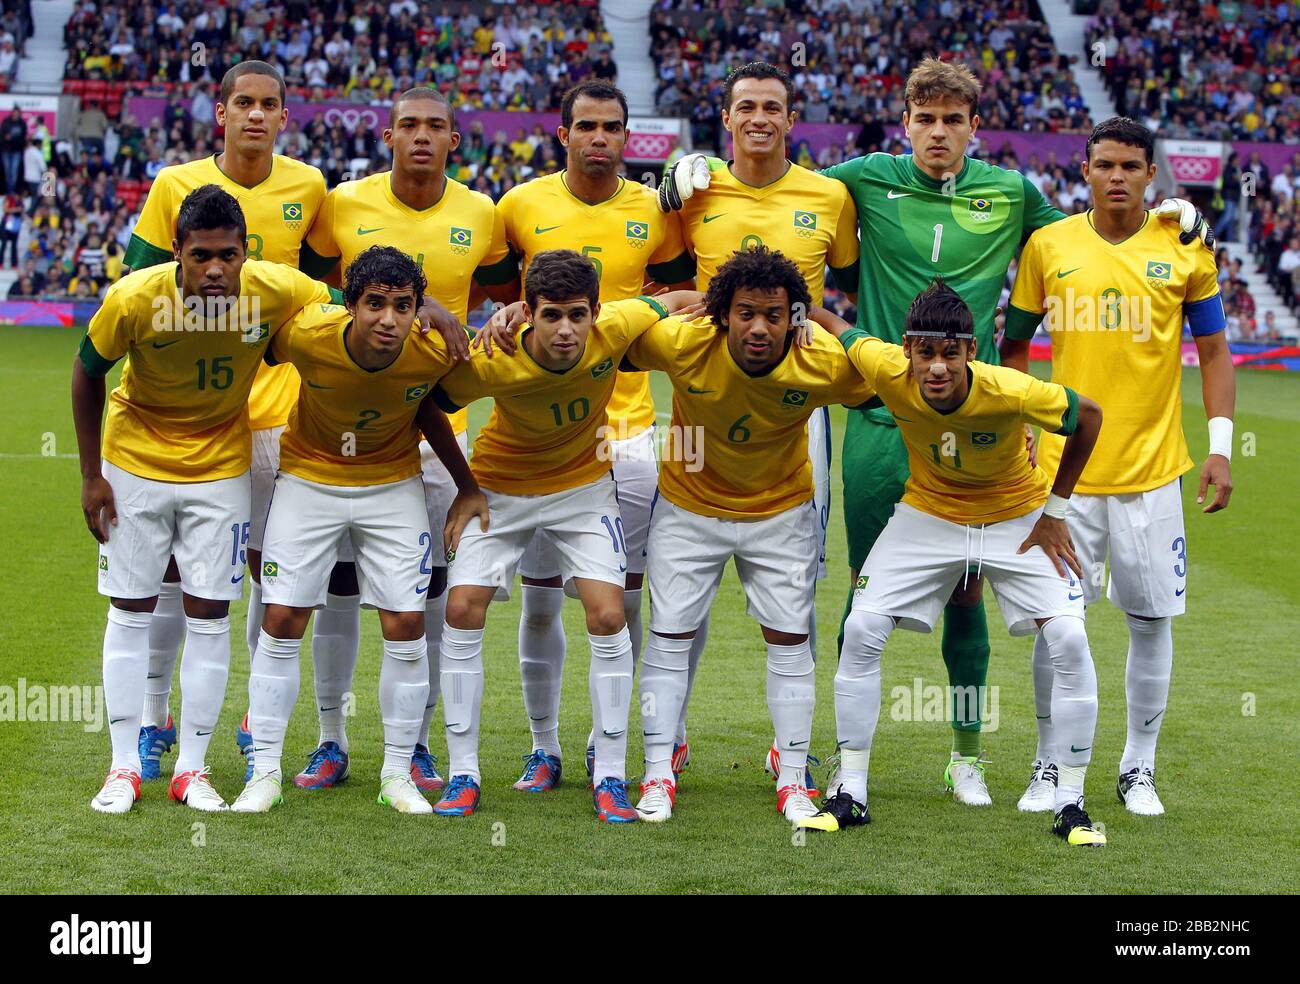 Brazil team  during the Olympic match at Old Trafford. Stock Photo